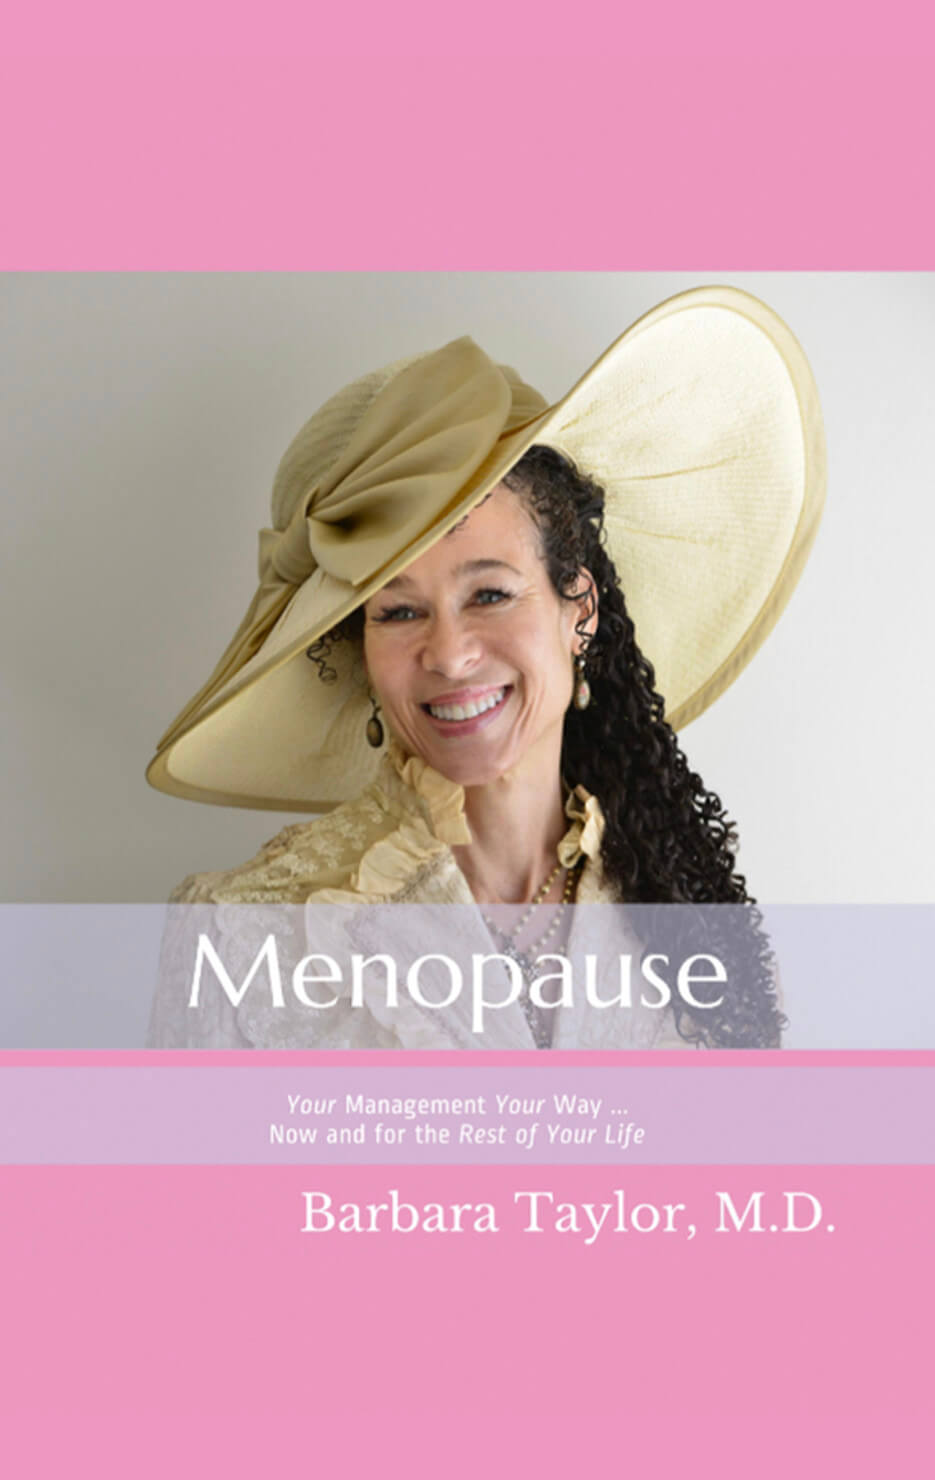 The menopause book by Barbie Taylor